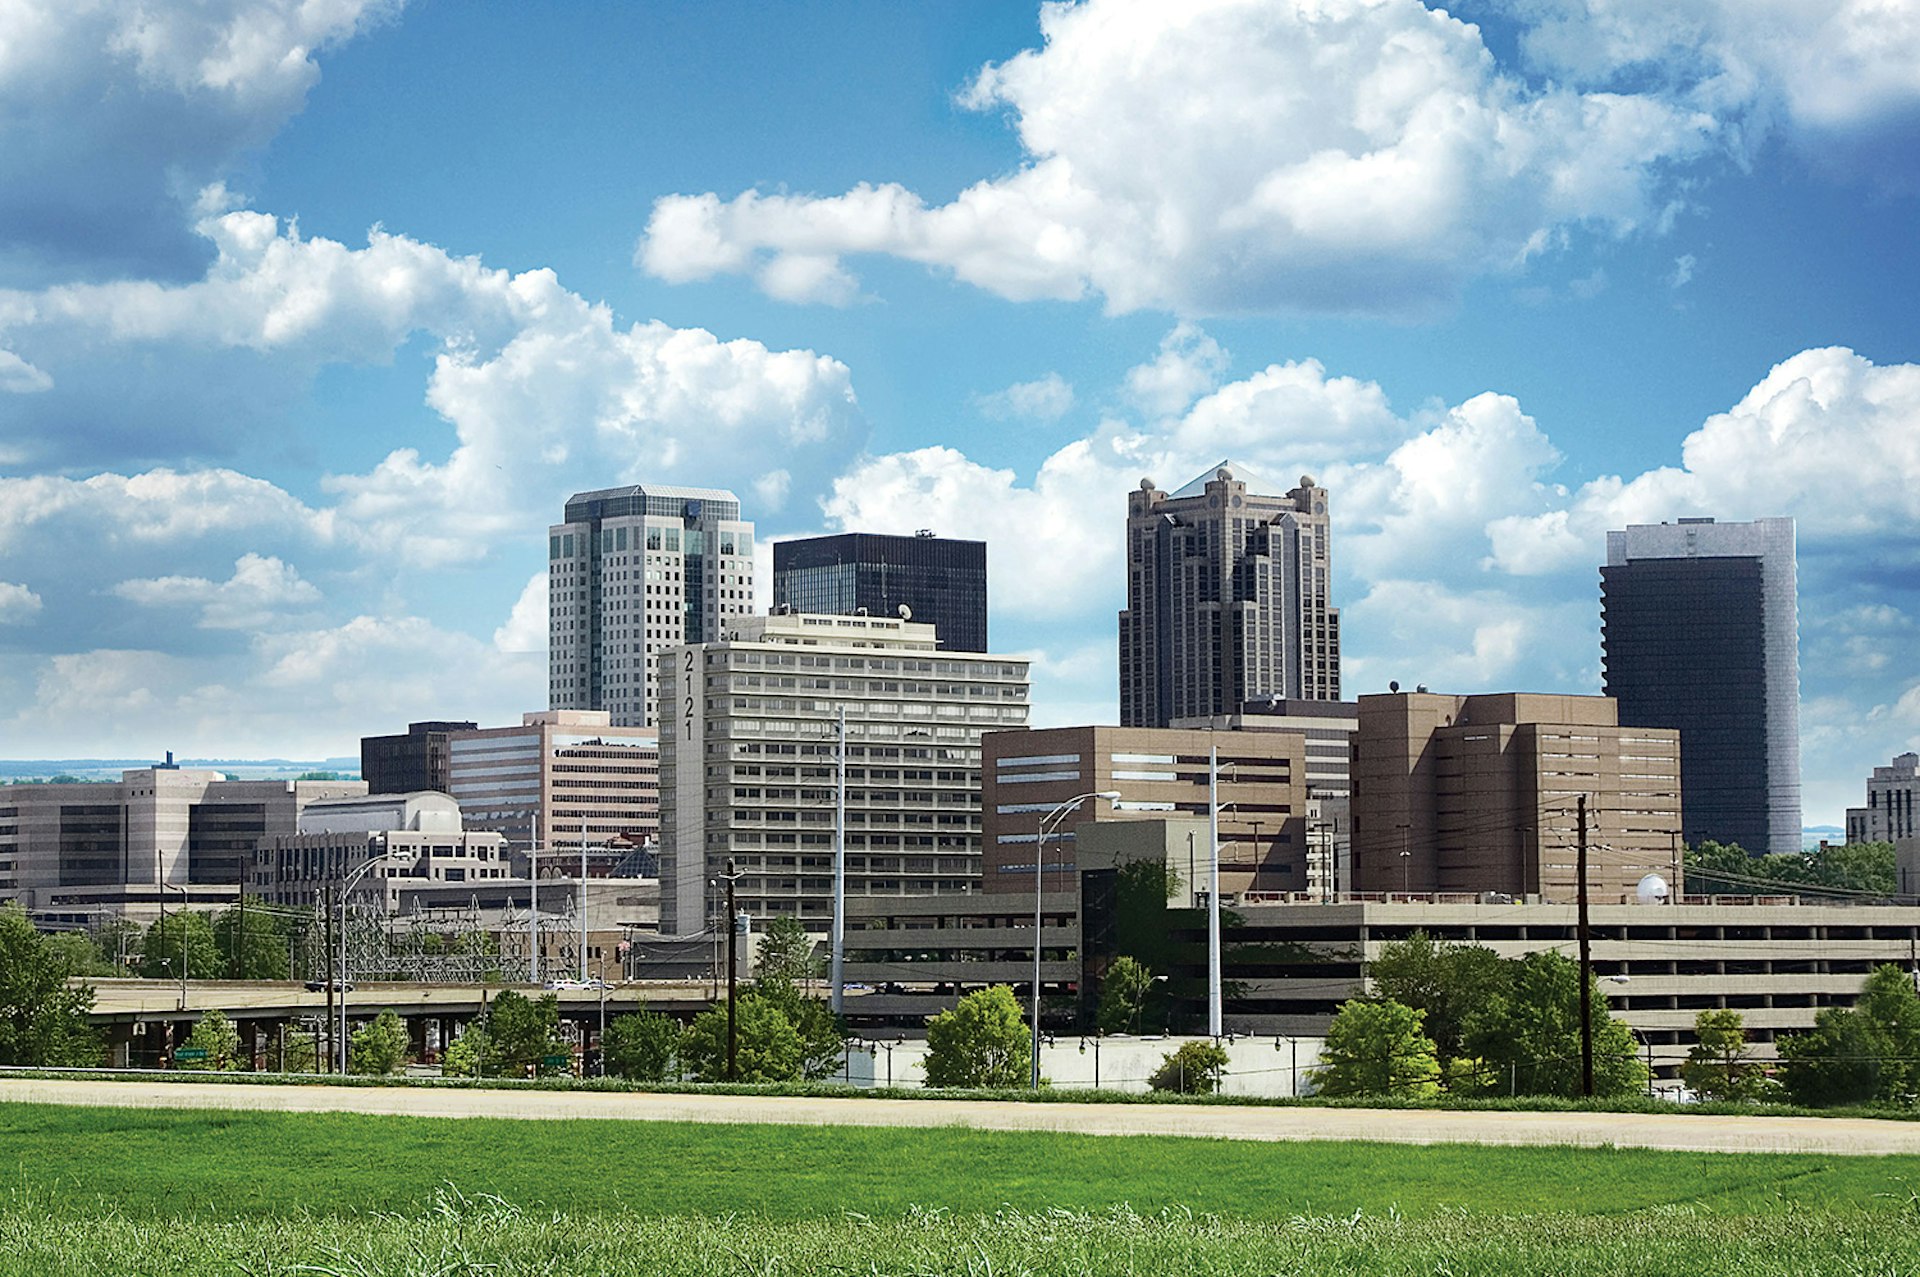 Birmingham, Alabama: this Southern skyline holds unexpected delights.